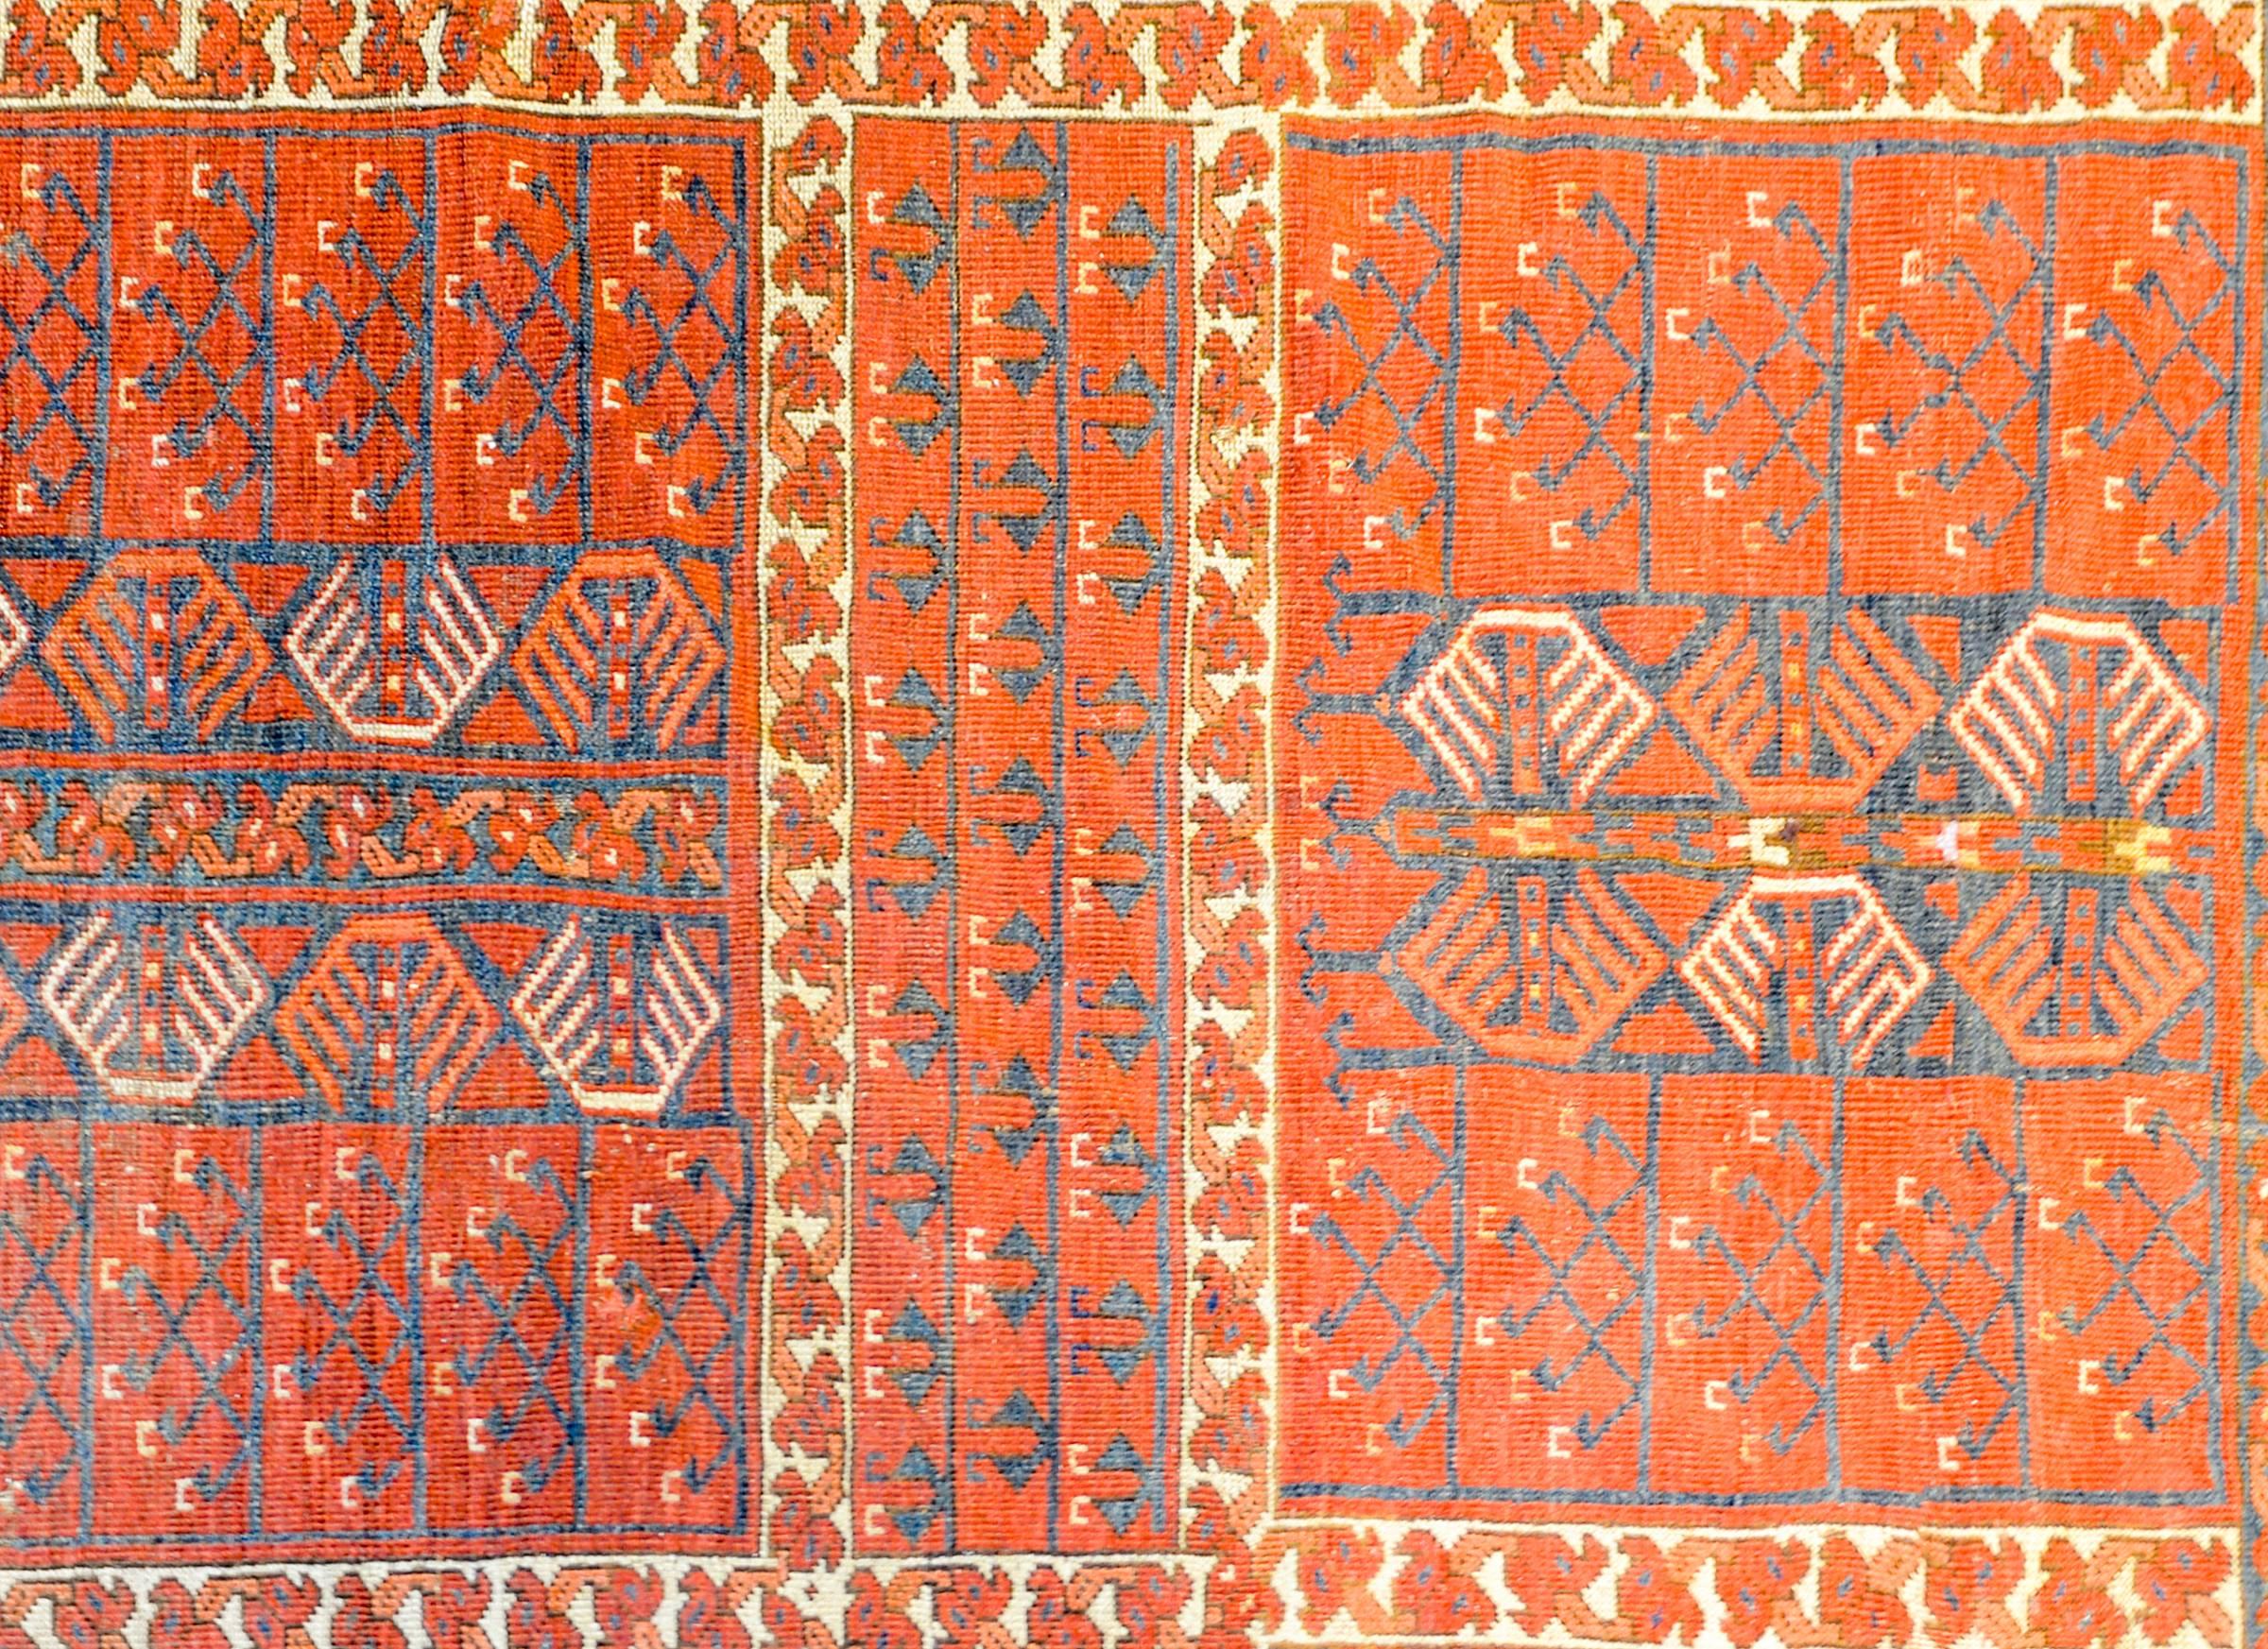 An exceptional early 20th century Afghani Ersari rug with an incredible pattern with stylized trees-of-life on a brilliant crimson background. Surrounding the trees-of-life are stylized floral motif bands on a natural undyed wool background. The